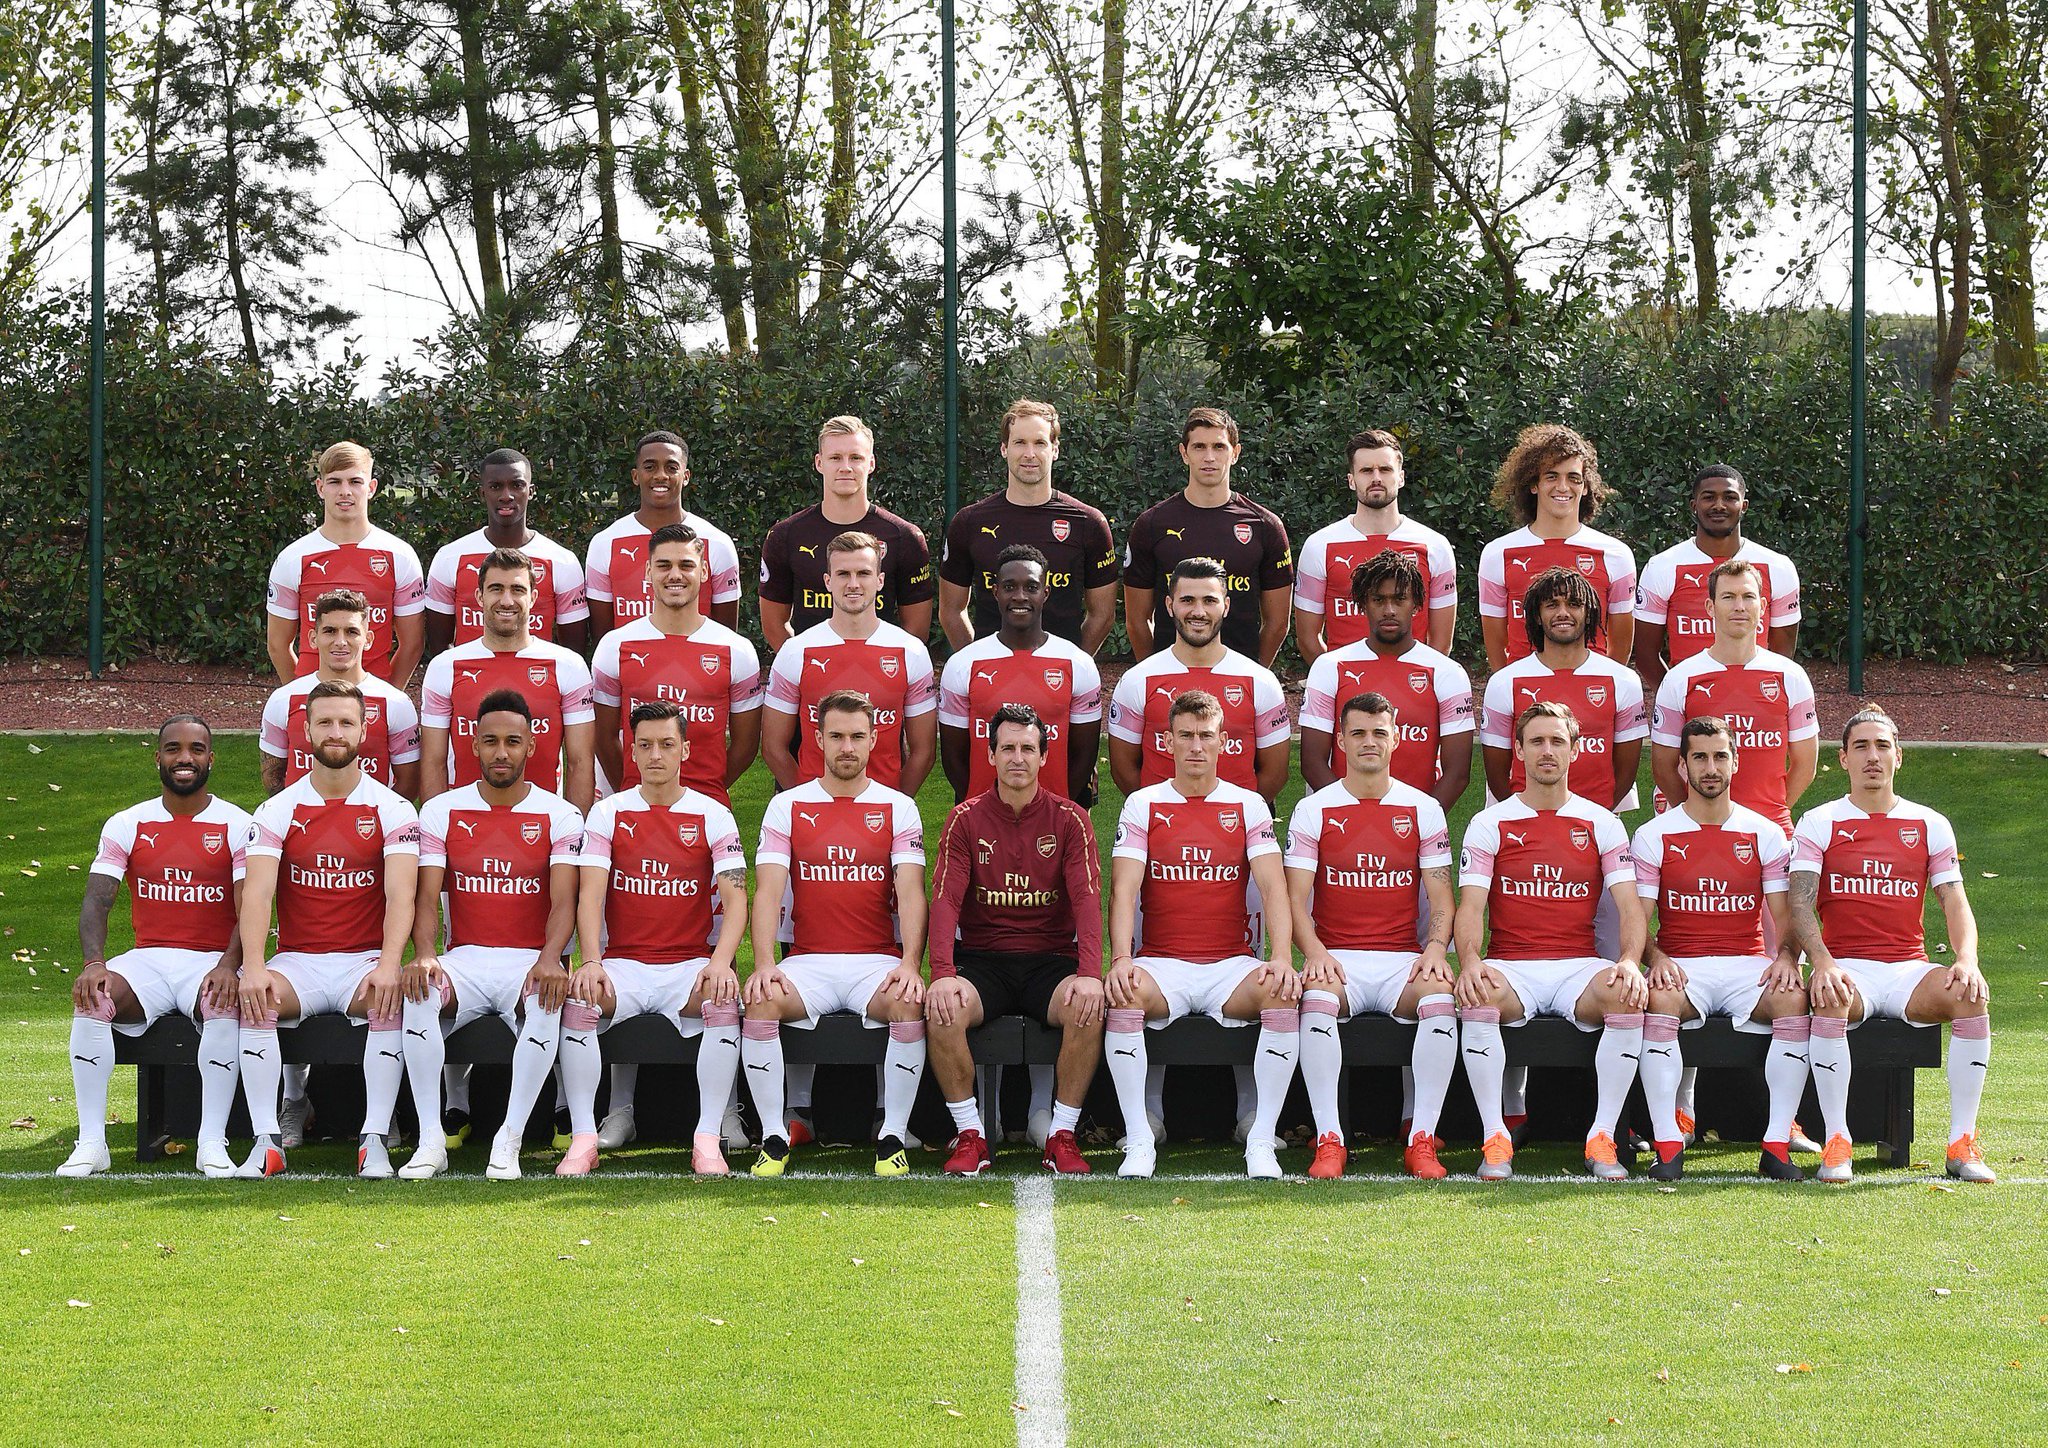 Arsenal on Twitter: "📸 The official squad photo of the class